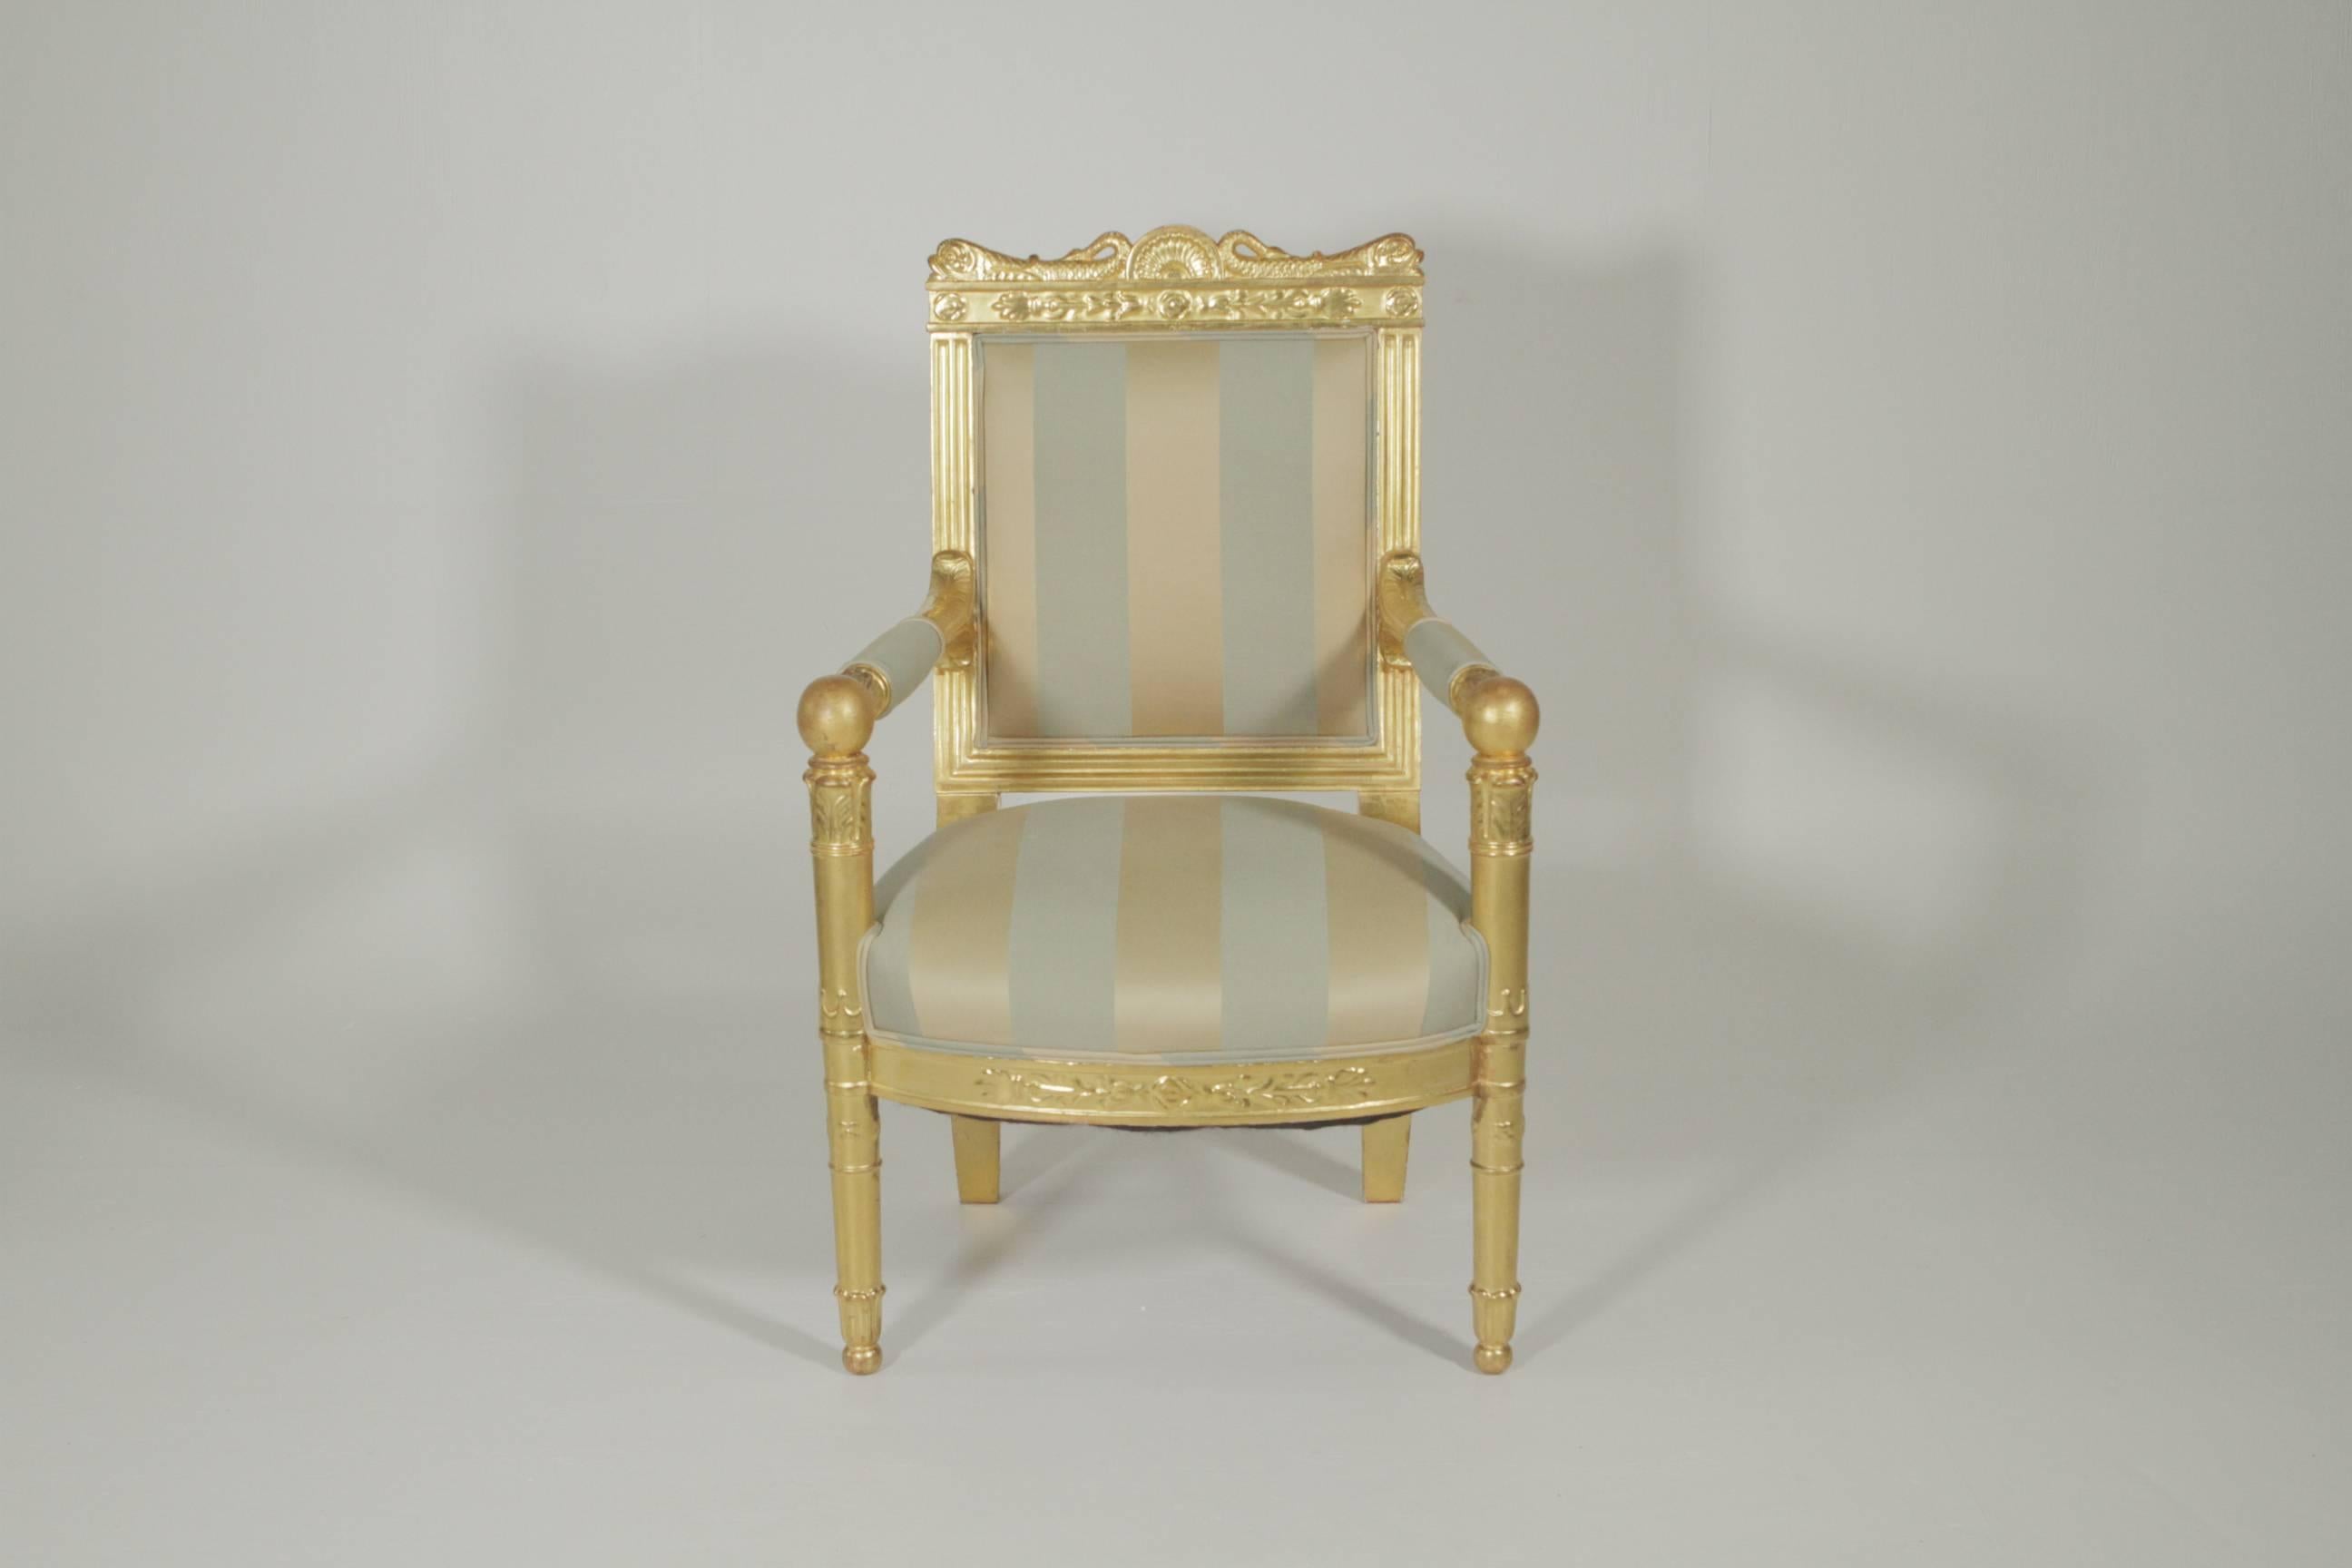 Beautiful gold gilt armchair with silk upholstery, circa 1880-1900. The top rail with dolphin motif corners with open arm sides with cannon ball corners.
                     